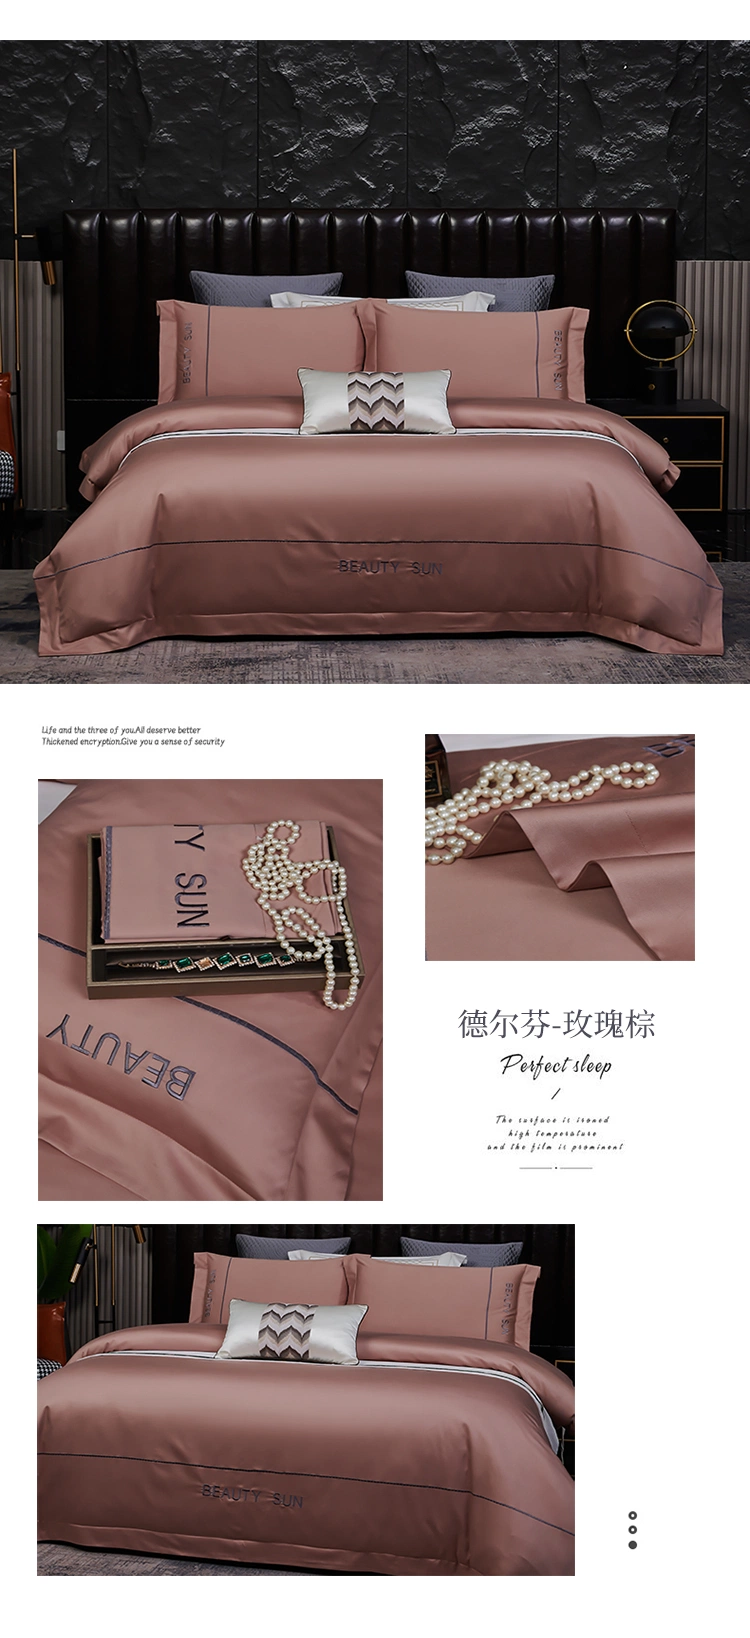 Wholesale Breathable Home Textile Luxury 4 Piece Bed Solid Queen 100% Bamboo 300tc Bed Sheet Bedding Set Duvet